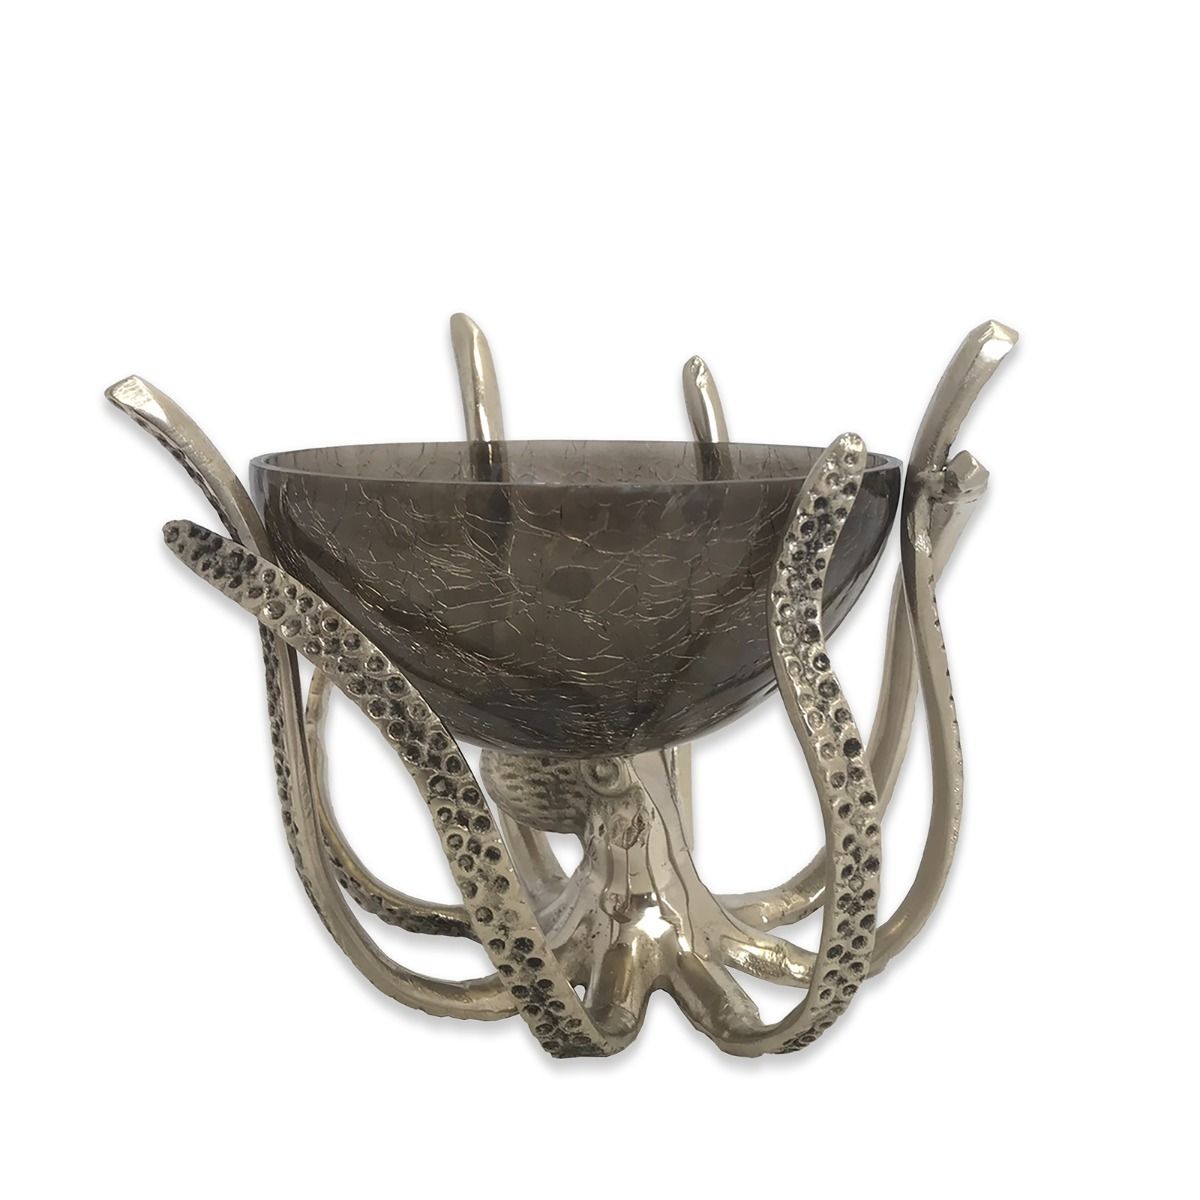 Culinary Concepts London. Mini Octopus Stand With Dark Crackle Glass Bowl - TheArtistsQuarter